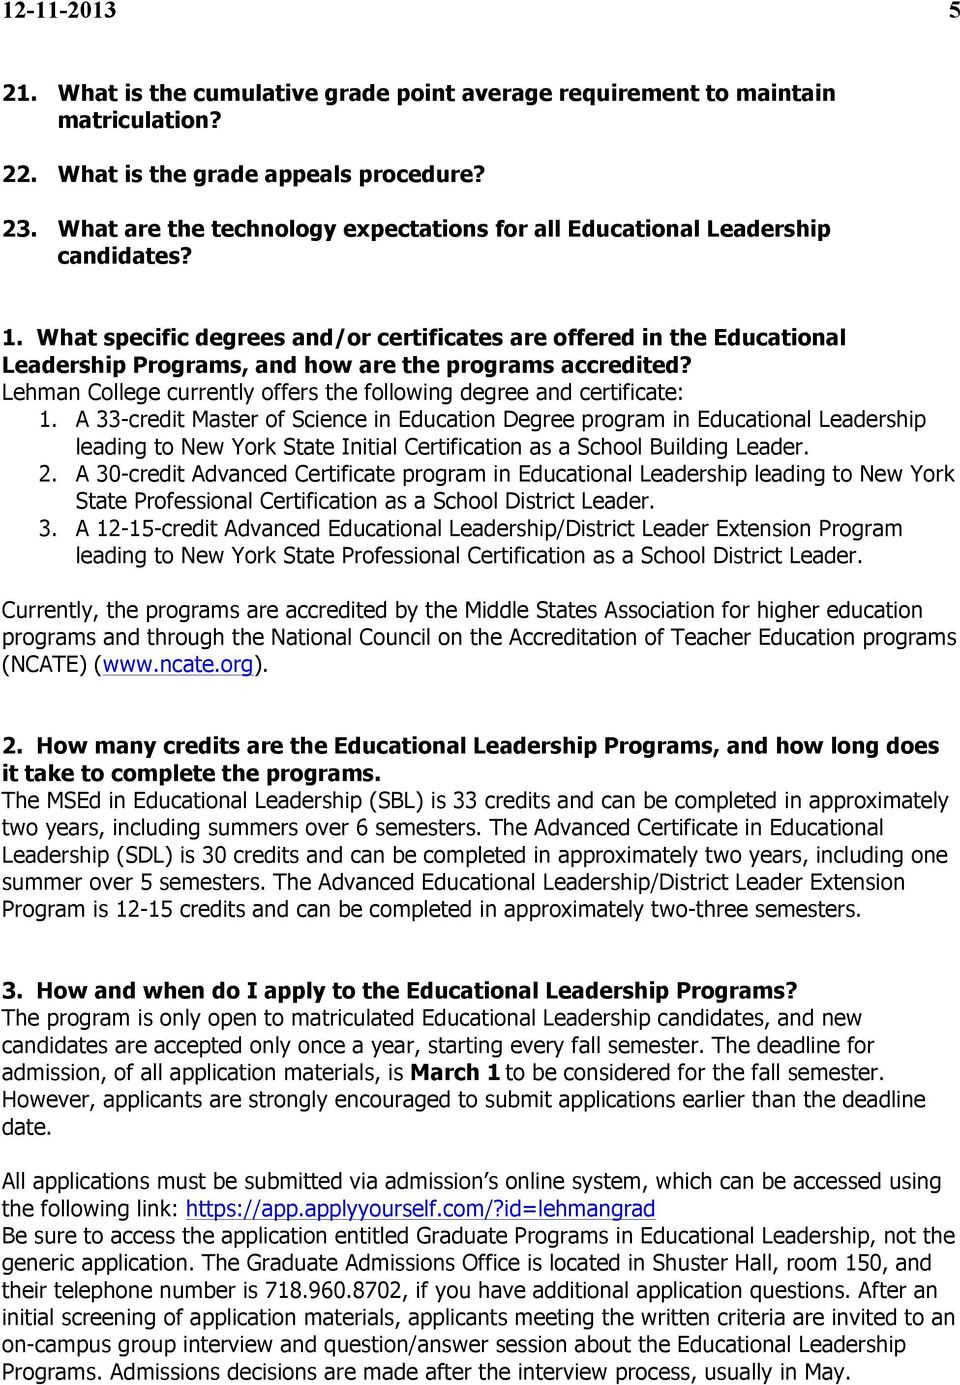 What specific degrees and/or certificates are offered in the Educational Leadership Programs, and how are the programs accredited?